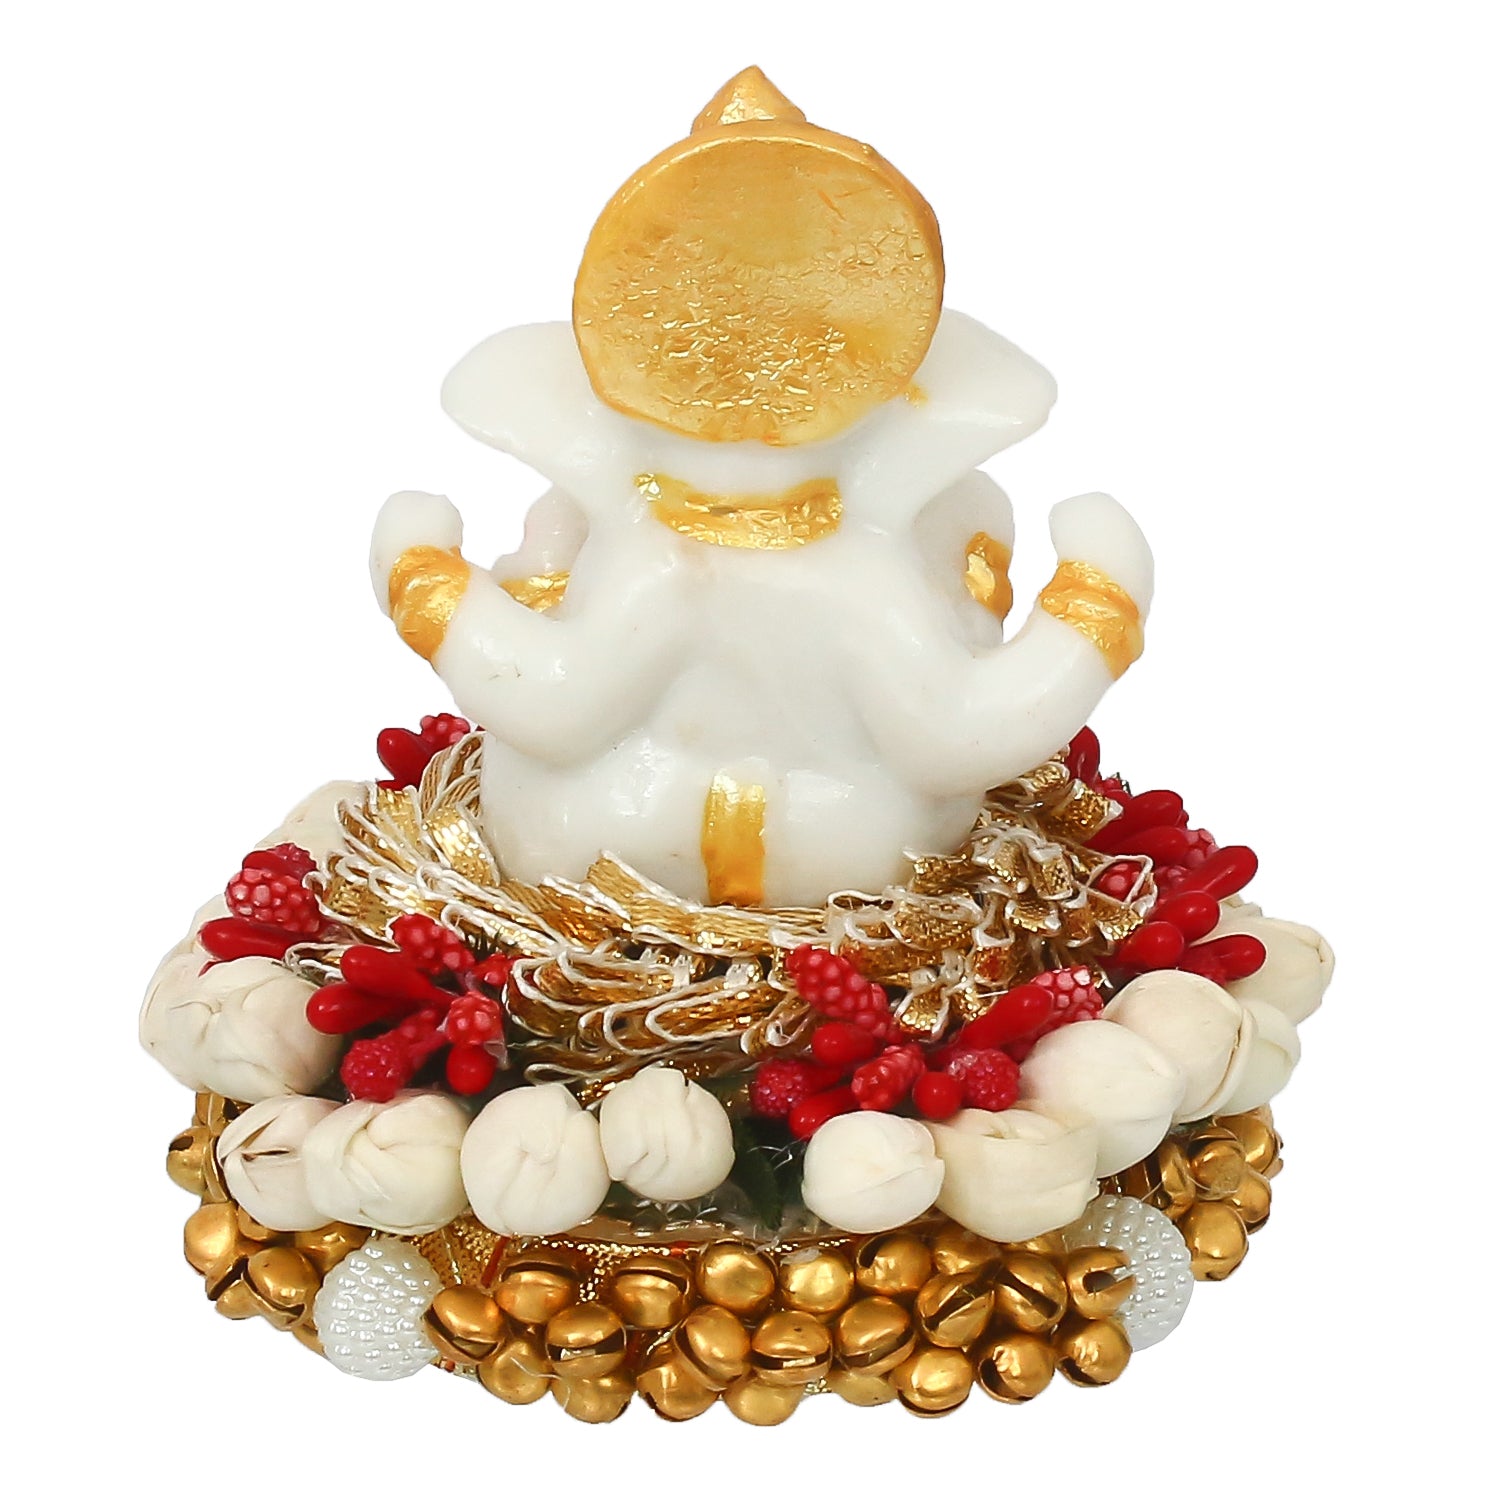 Polyresin Ganesha Idol on Decorative Handcrafted Plate for Home and Car Dashboard 5